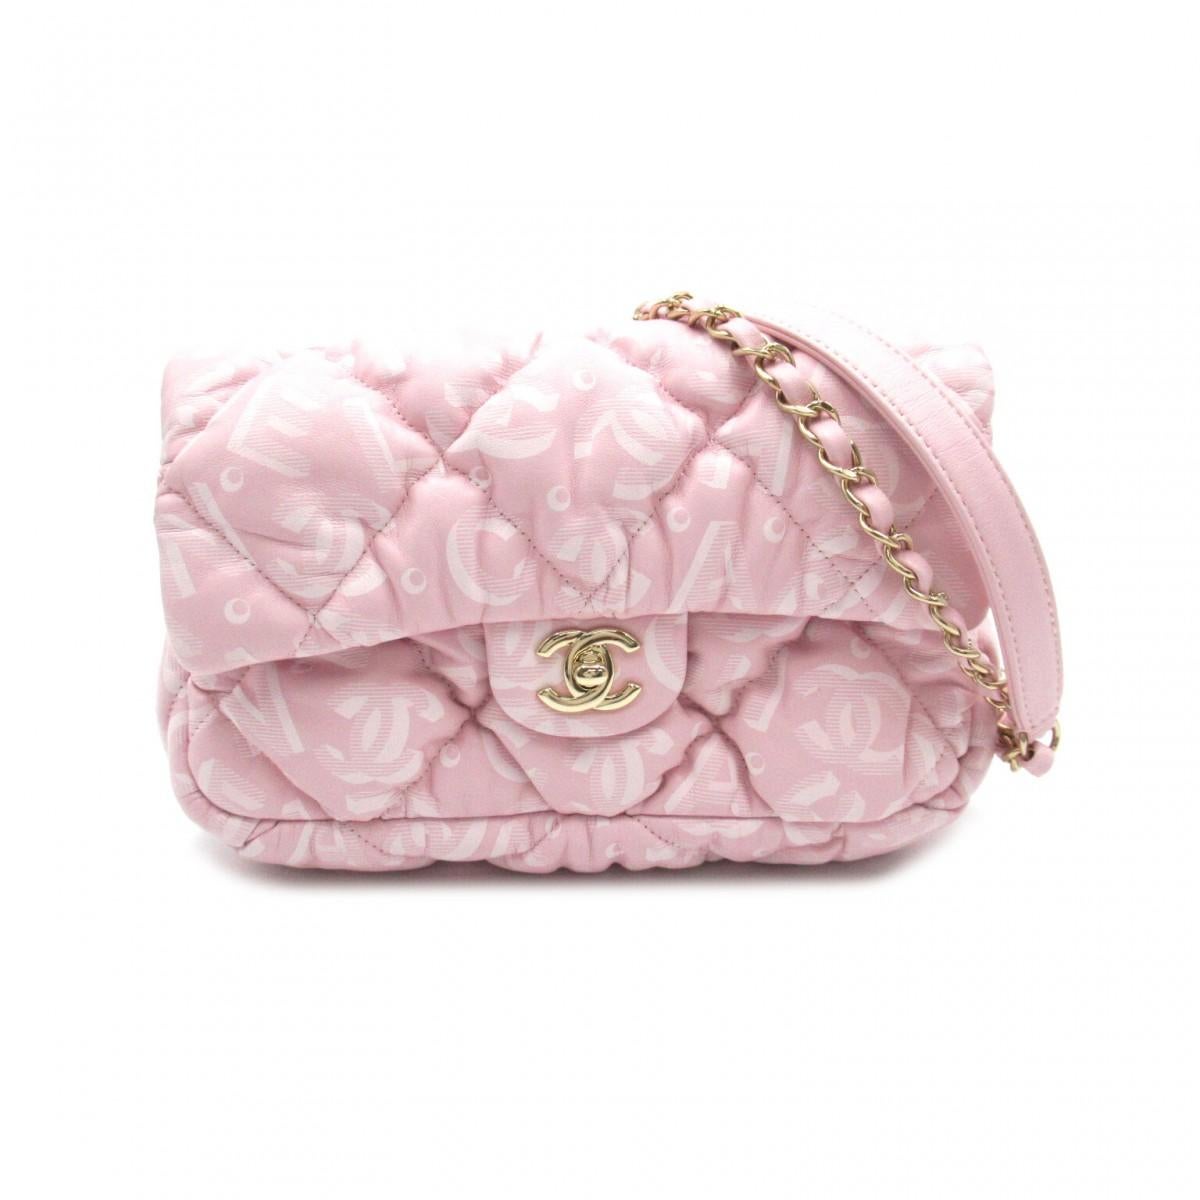 This Chanel shoulder bag is constructed of soft quilted lambskin leather with the Chanel name and logo printed throughout the exterior. The bag features light gold metal, a metal and pink lambskin threaded shoulder strap and a classic CC turn lock